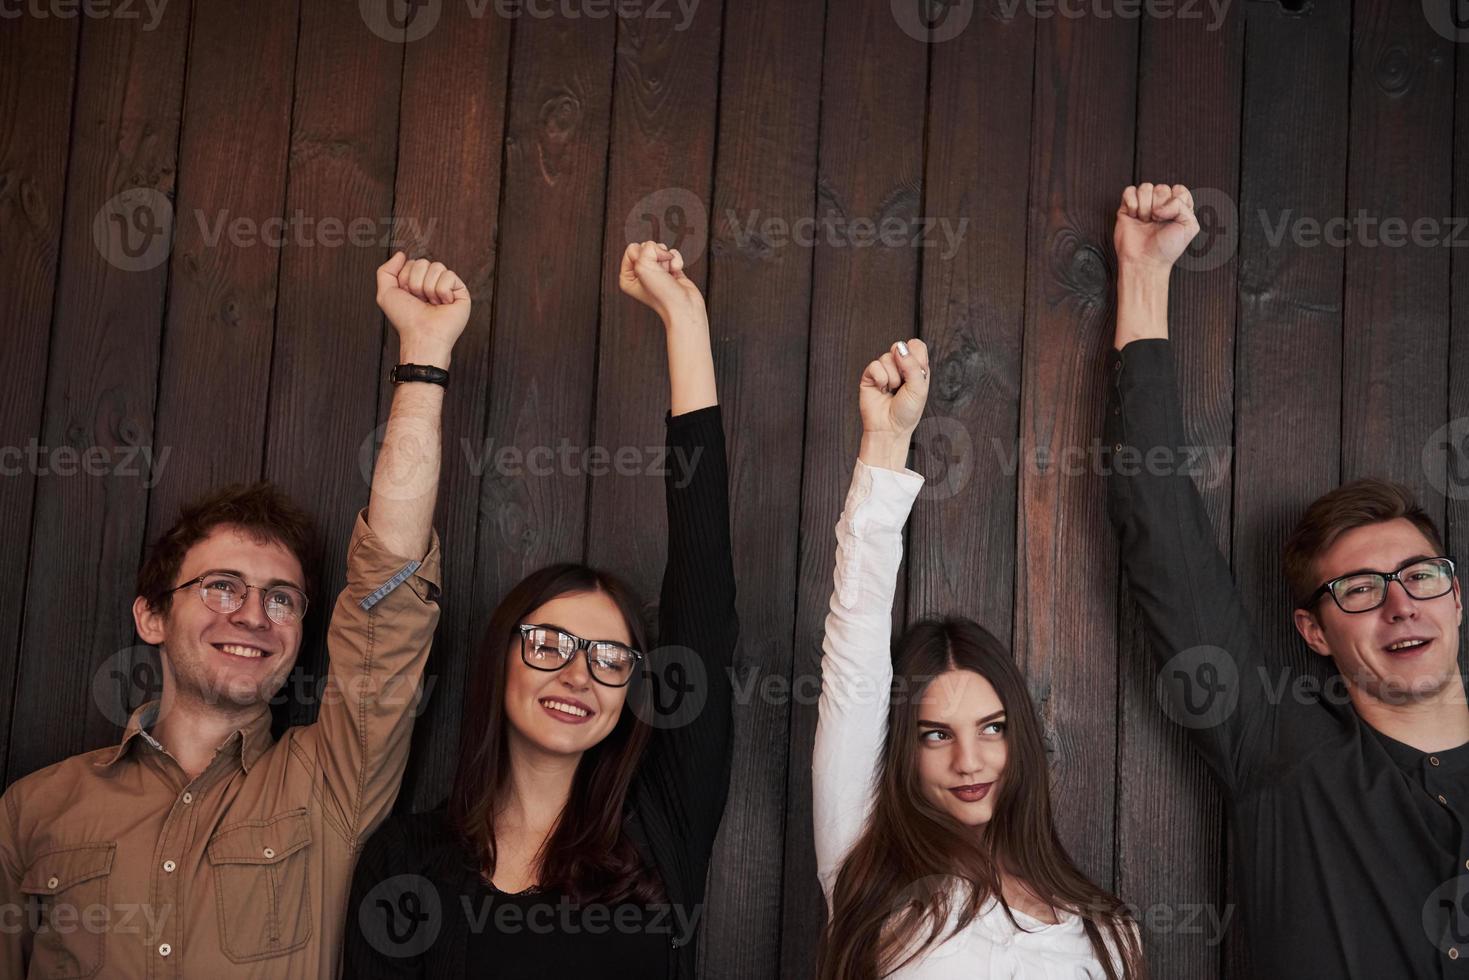 Everyone is happy. Celebrating succeess. Friends put their hands up against black wooden wall photo